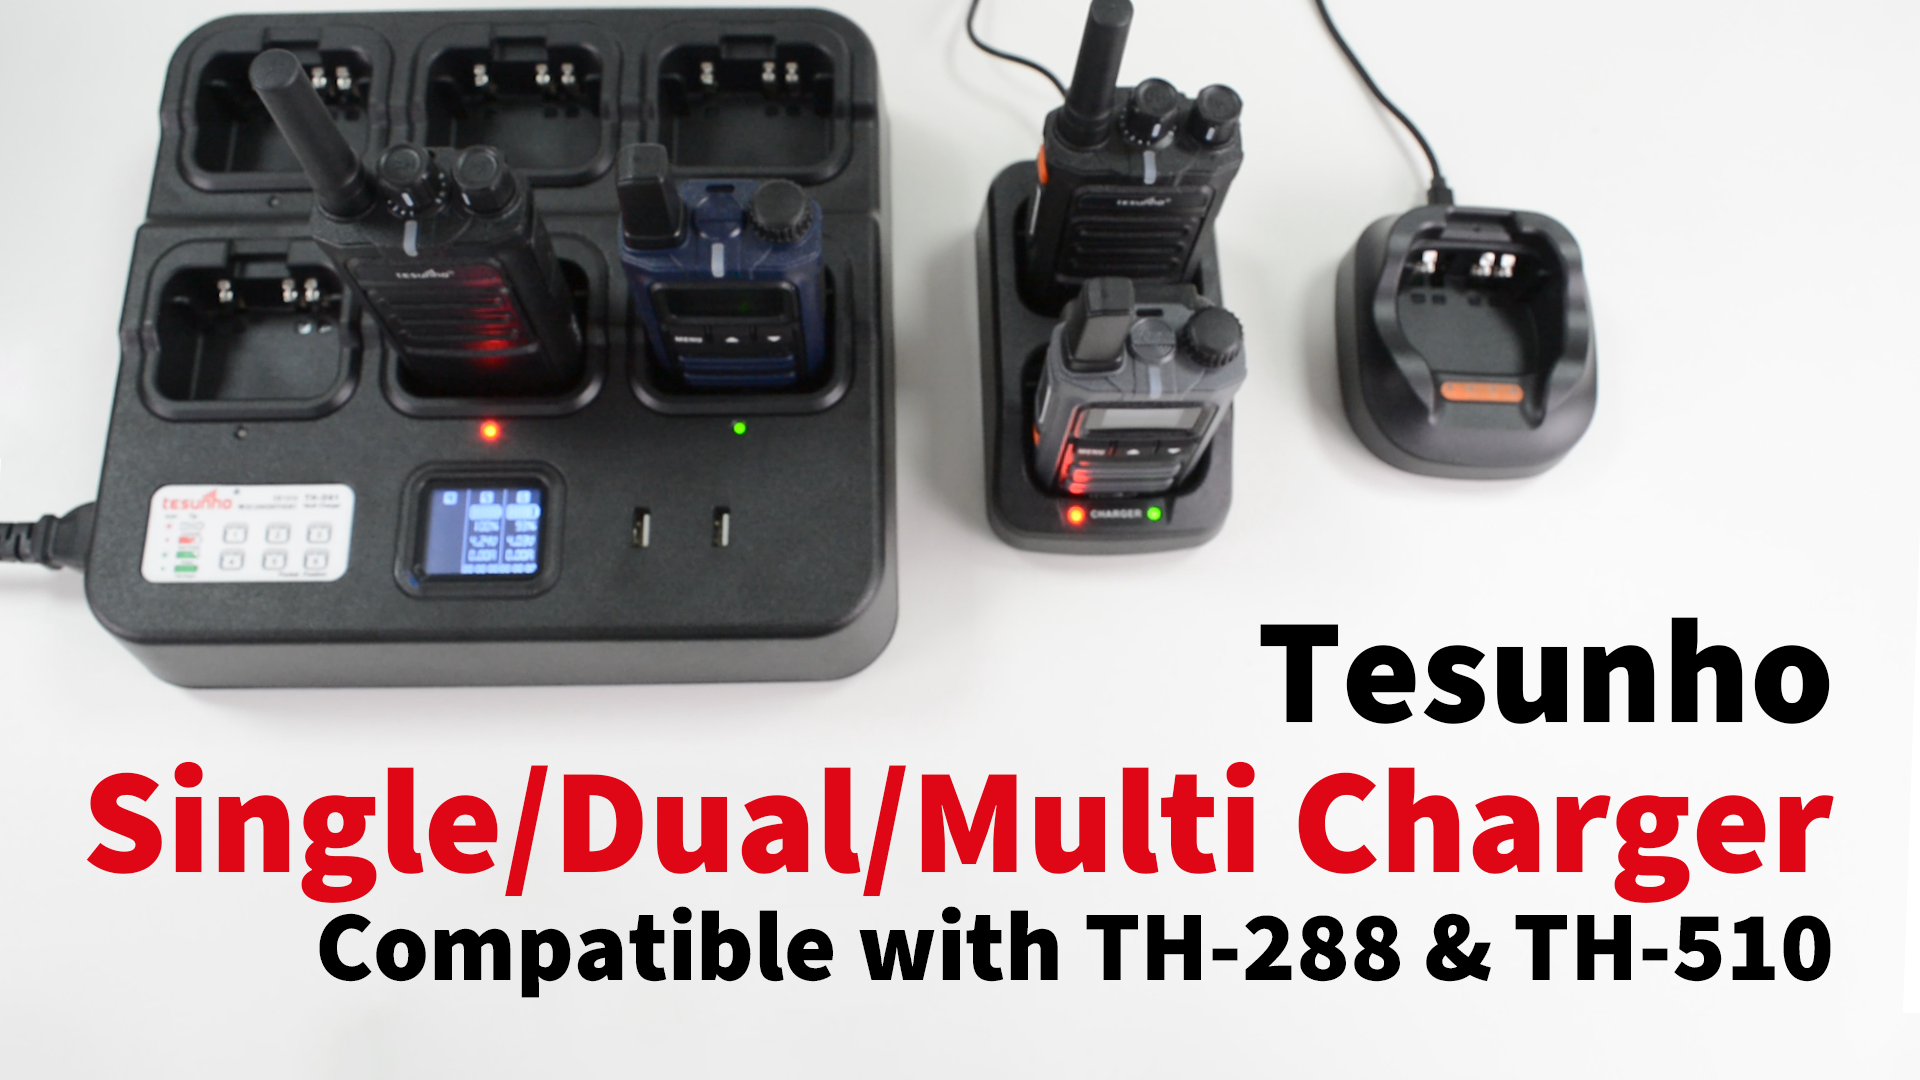 Tesunho Single Charger, Dual Charger & Multi Charger TH-D61